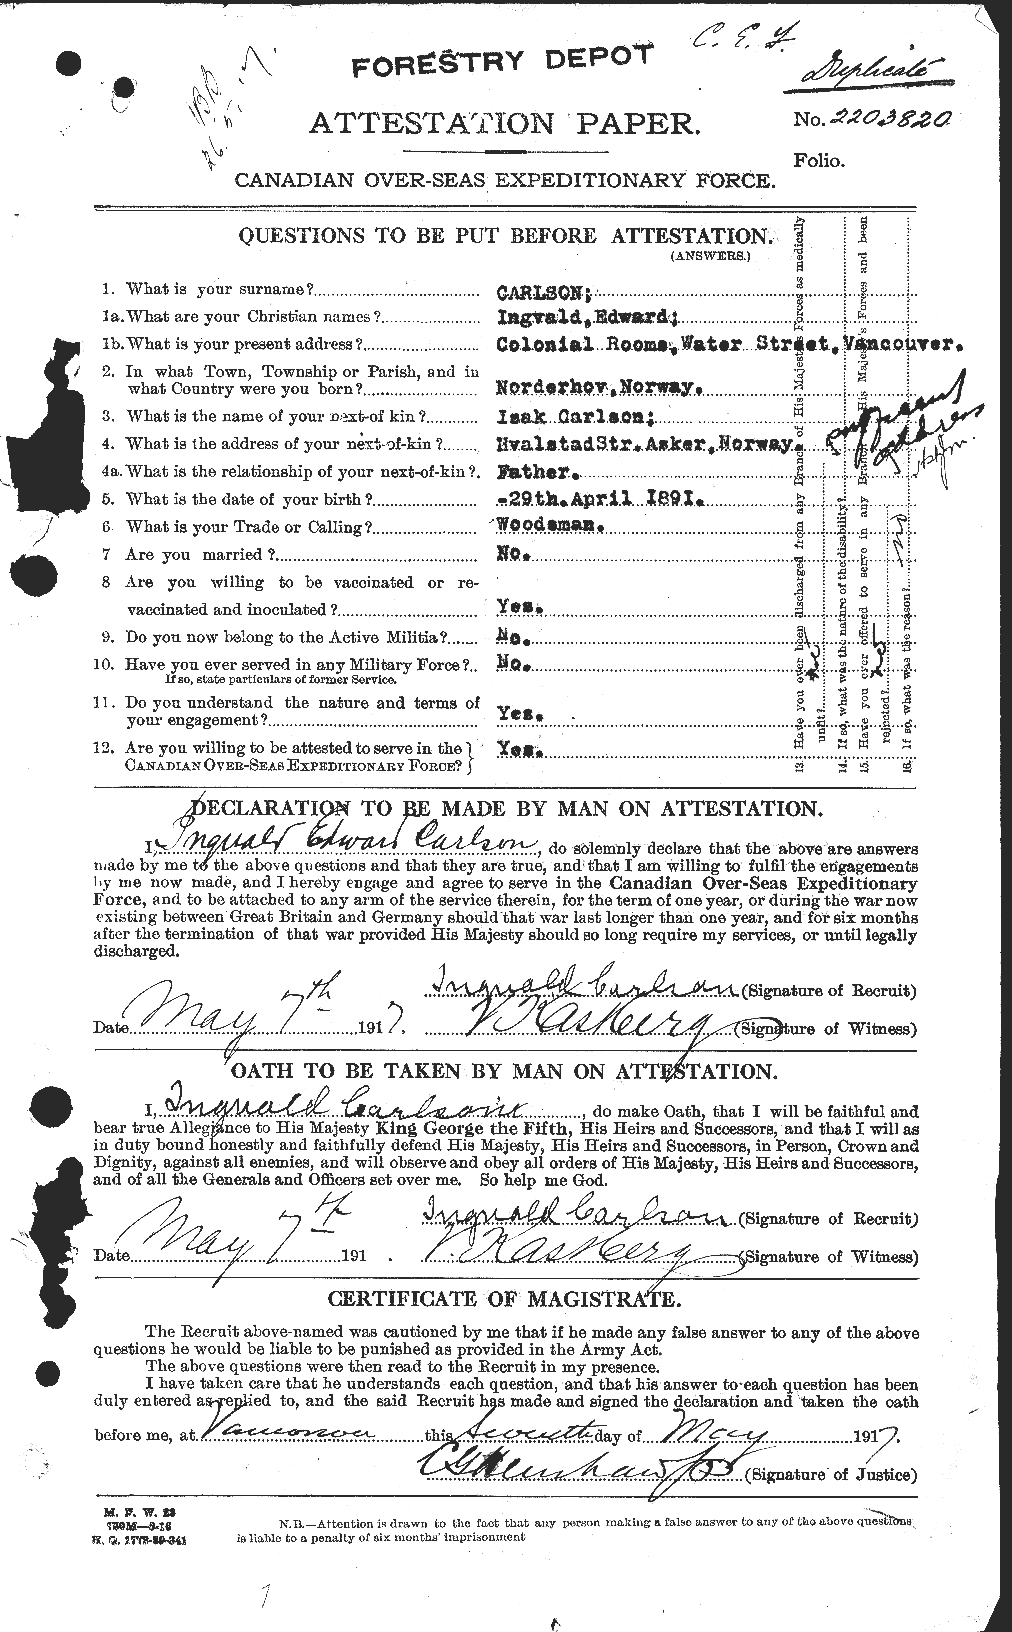 Personnel Records of the First World War - CEF 004561a